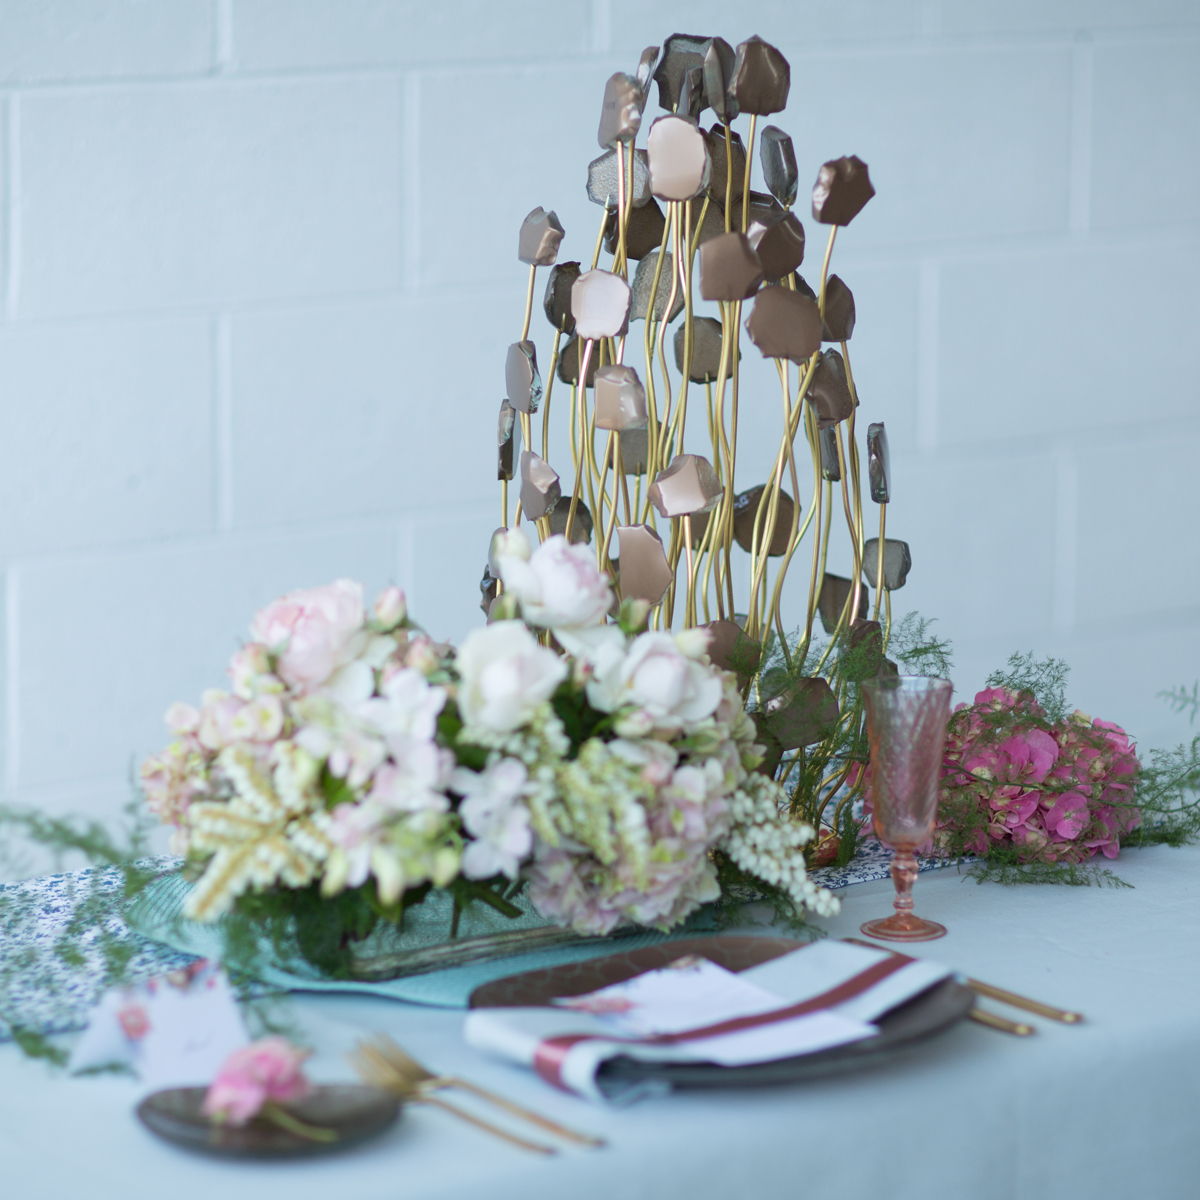 wedding ideas - unique centrepiece on table setting with deisgner tableware and pastel flowers 